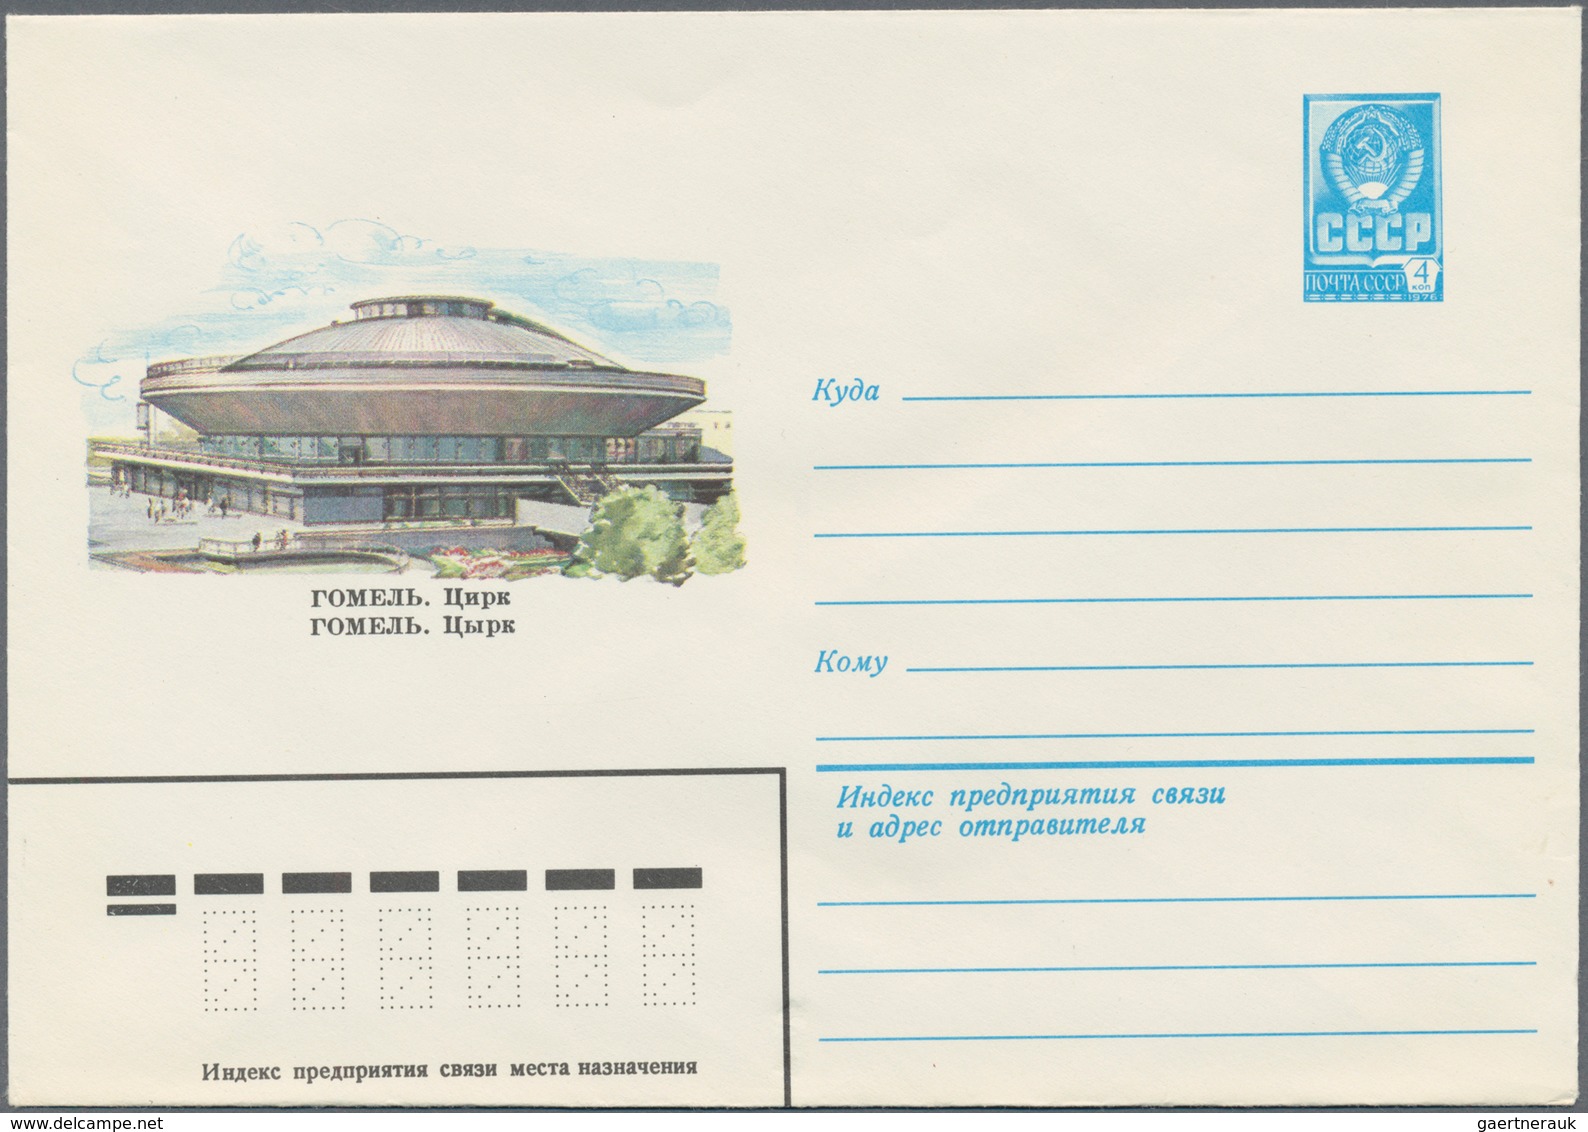 Sowjetunion - Ganzsachen: 1981/82 Accumulation Of Ca. 720 Unused Pictured Postal Stationery Envelope - Unclassified